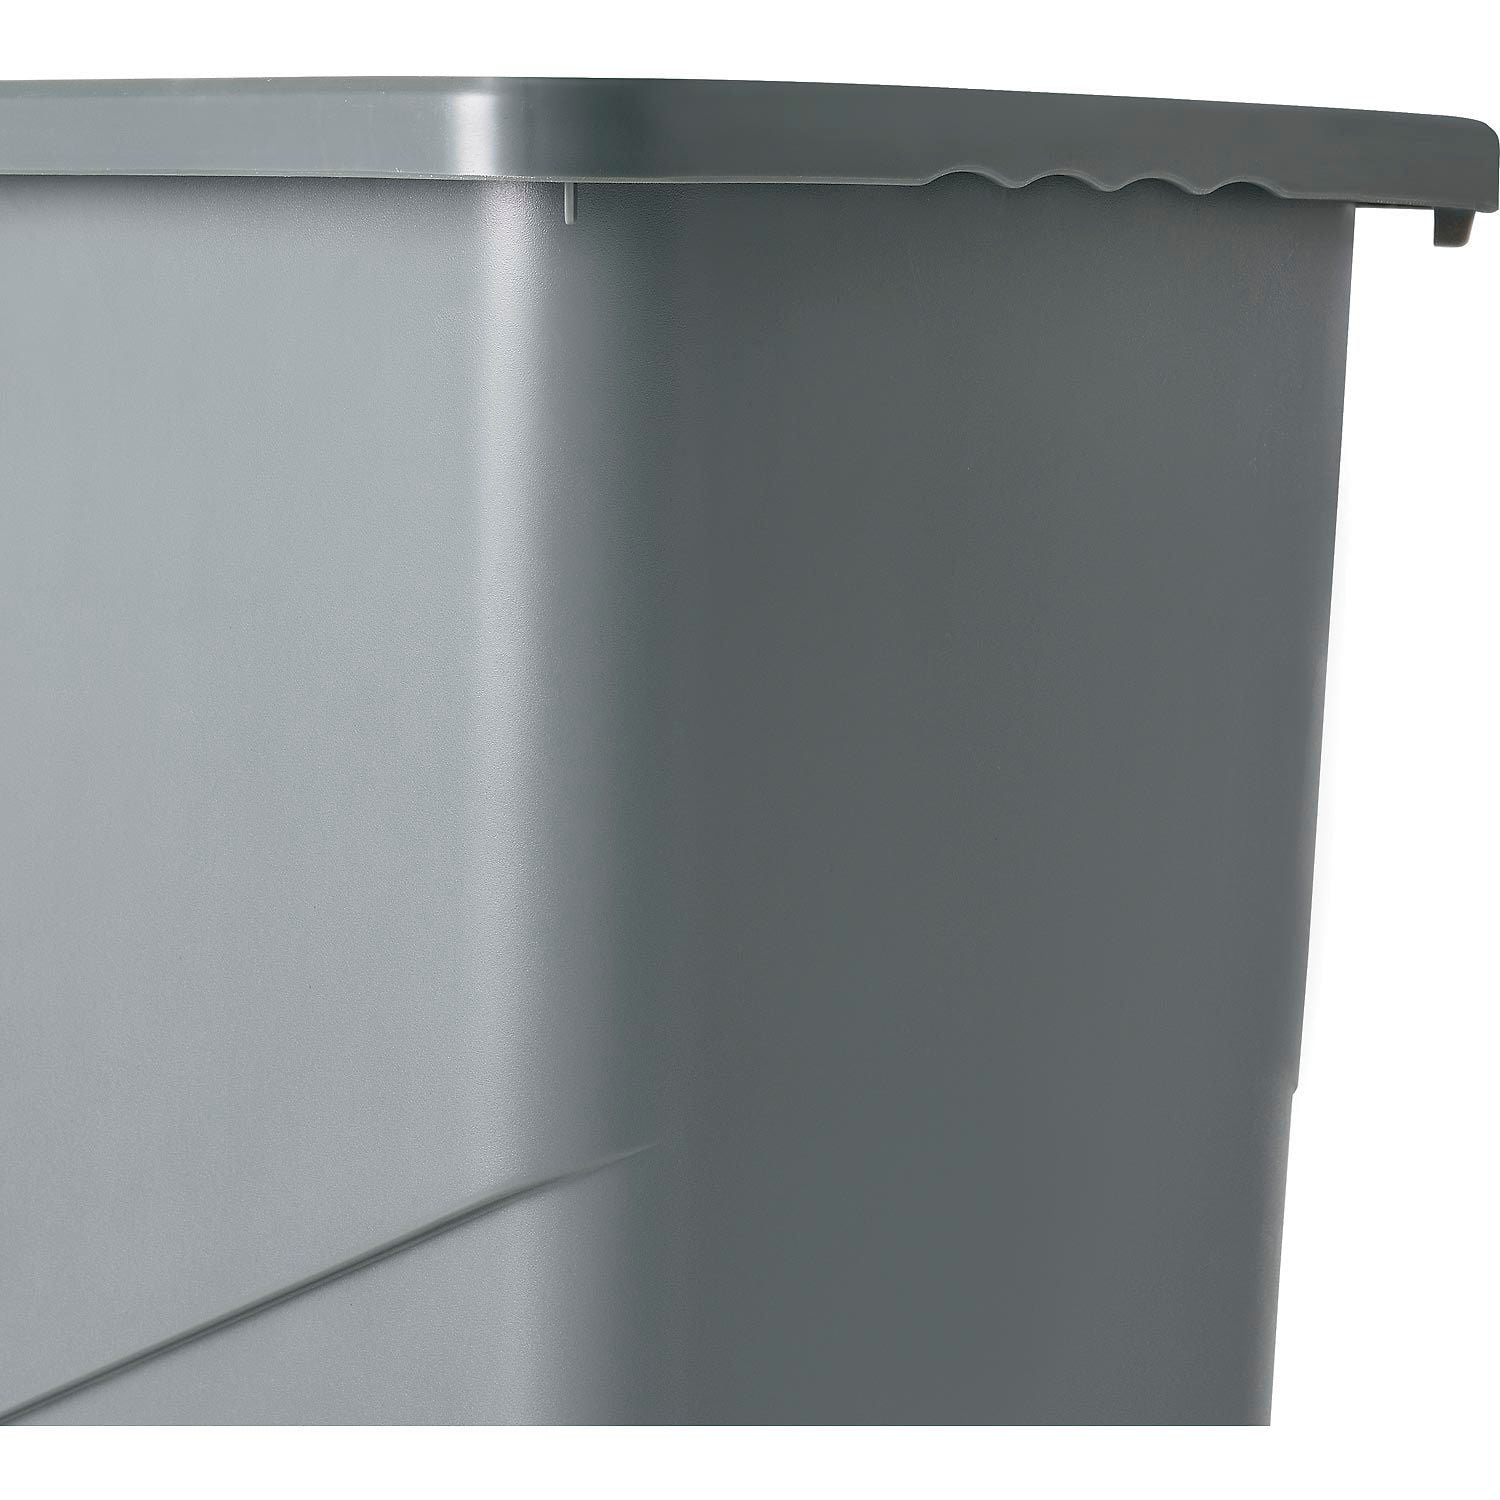 Rubbermaid 9W27 Brute 50 Gallon Rollout Trash Can With Lid, Gray